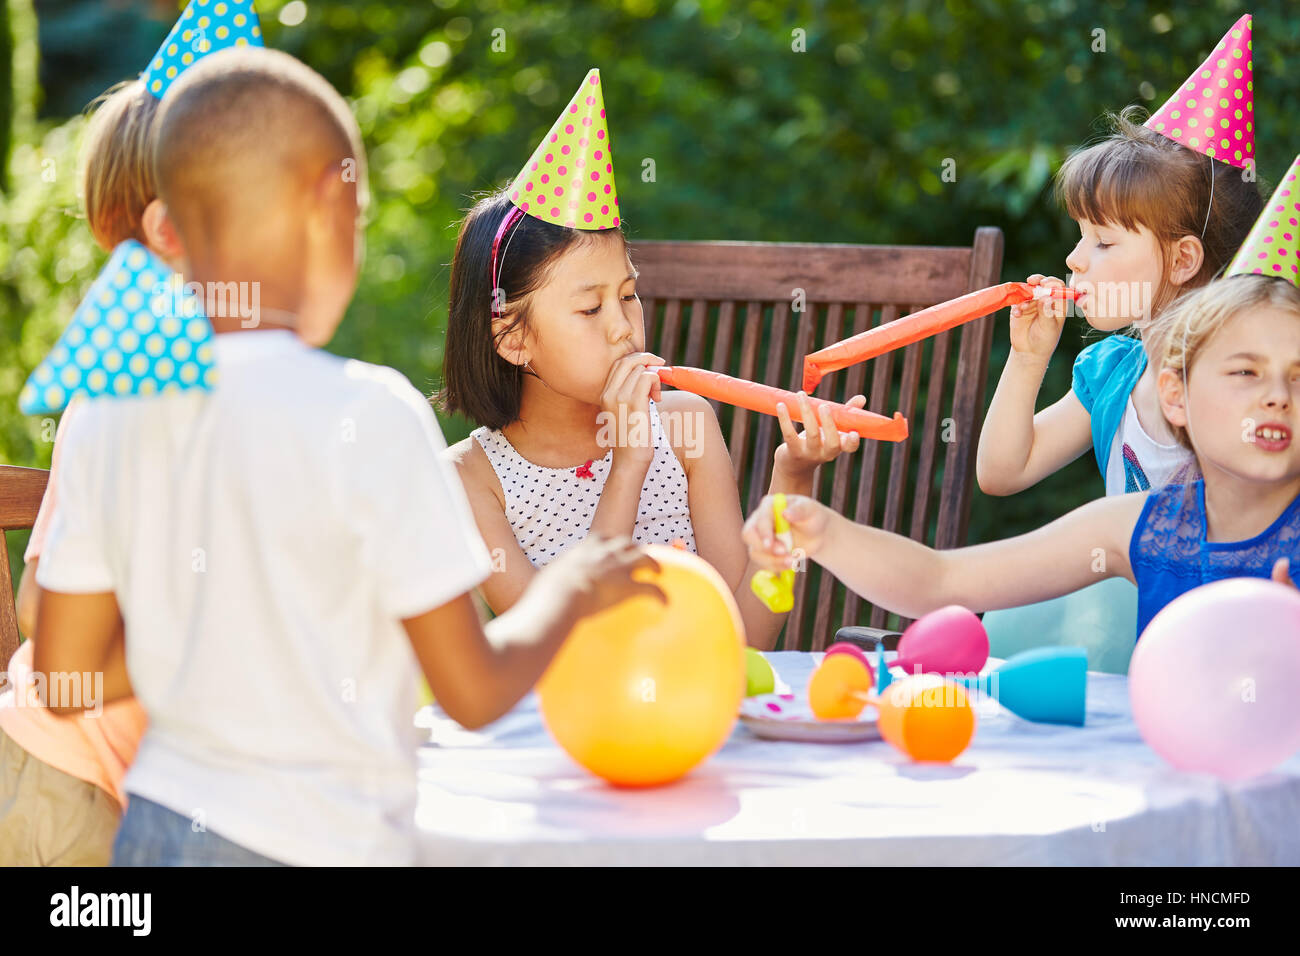 Kids celebrate together at garden party in summer with balloons and noise makers Stock Photo